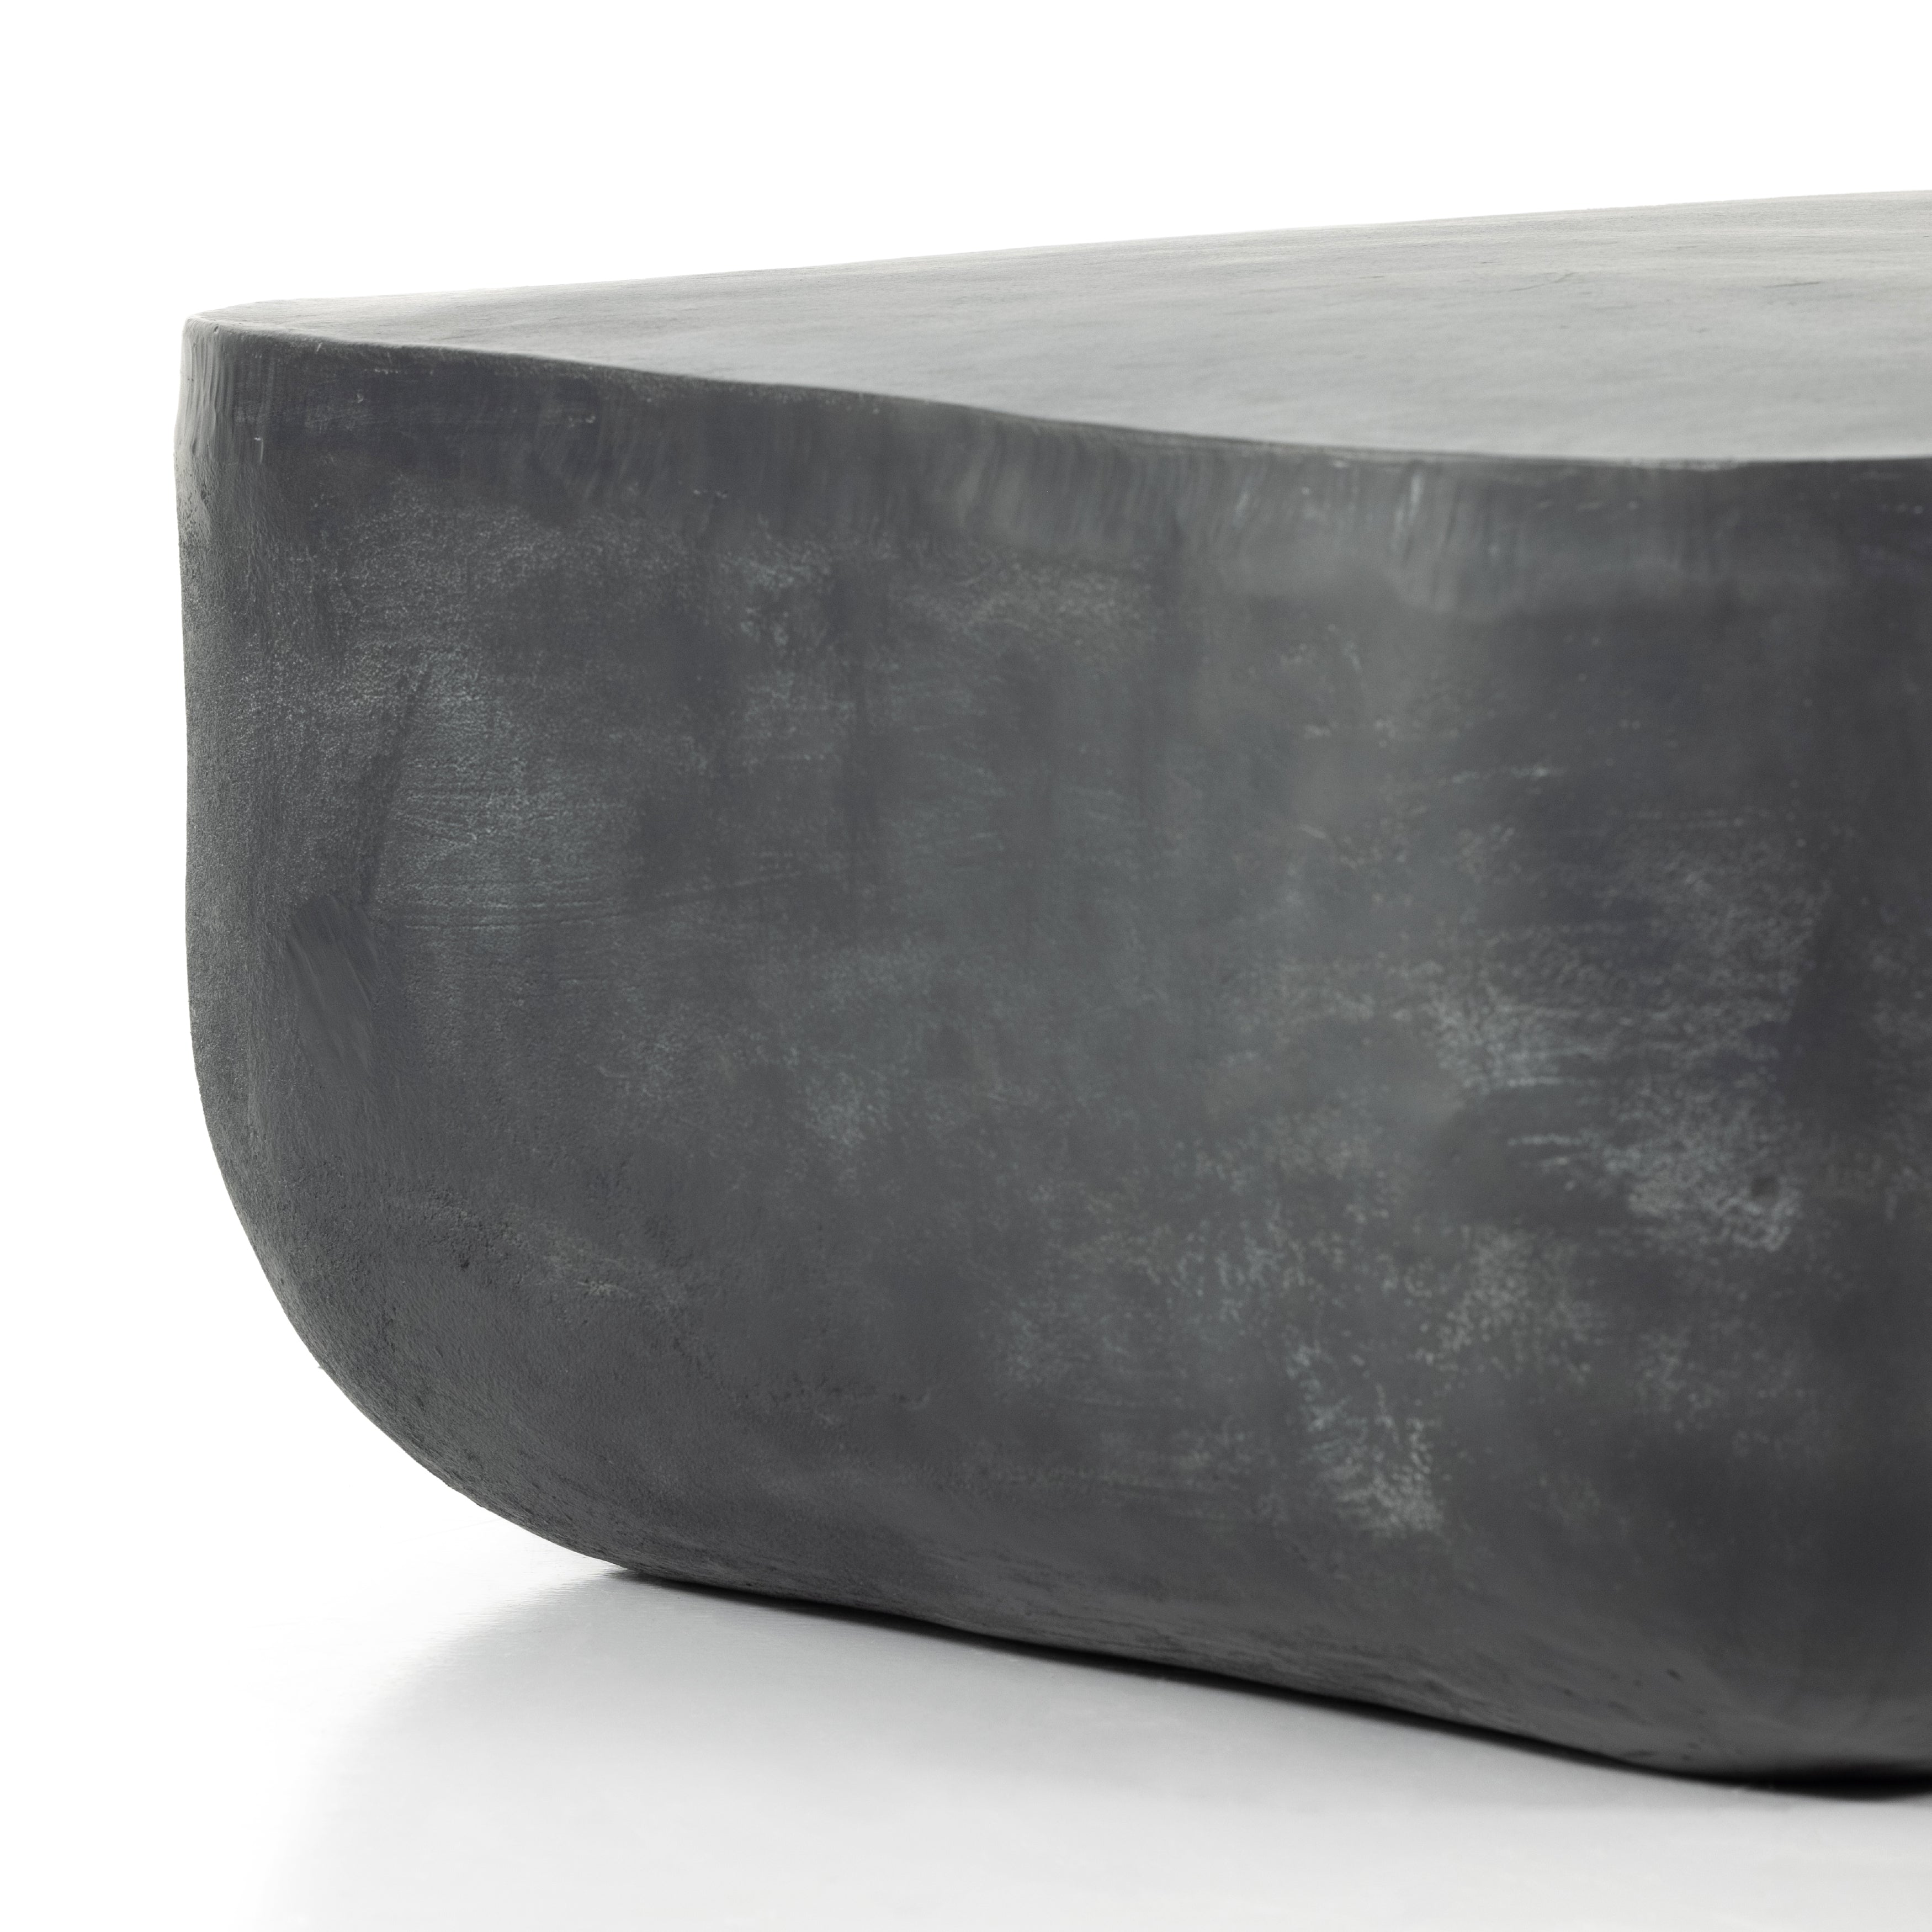 Aged Grey (35.5in Size) | Basil Square Outdoor Coffee Table | Valley Ridge Furniture